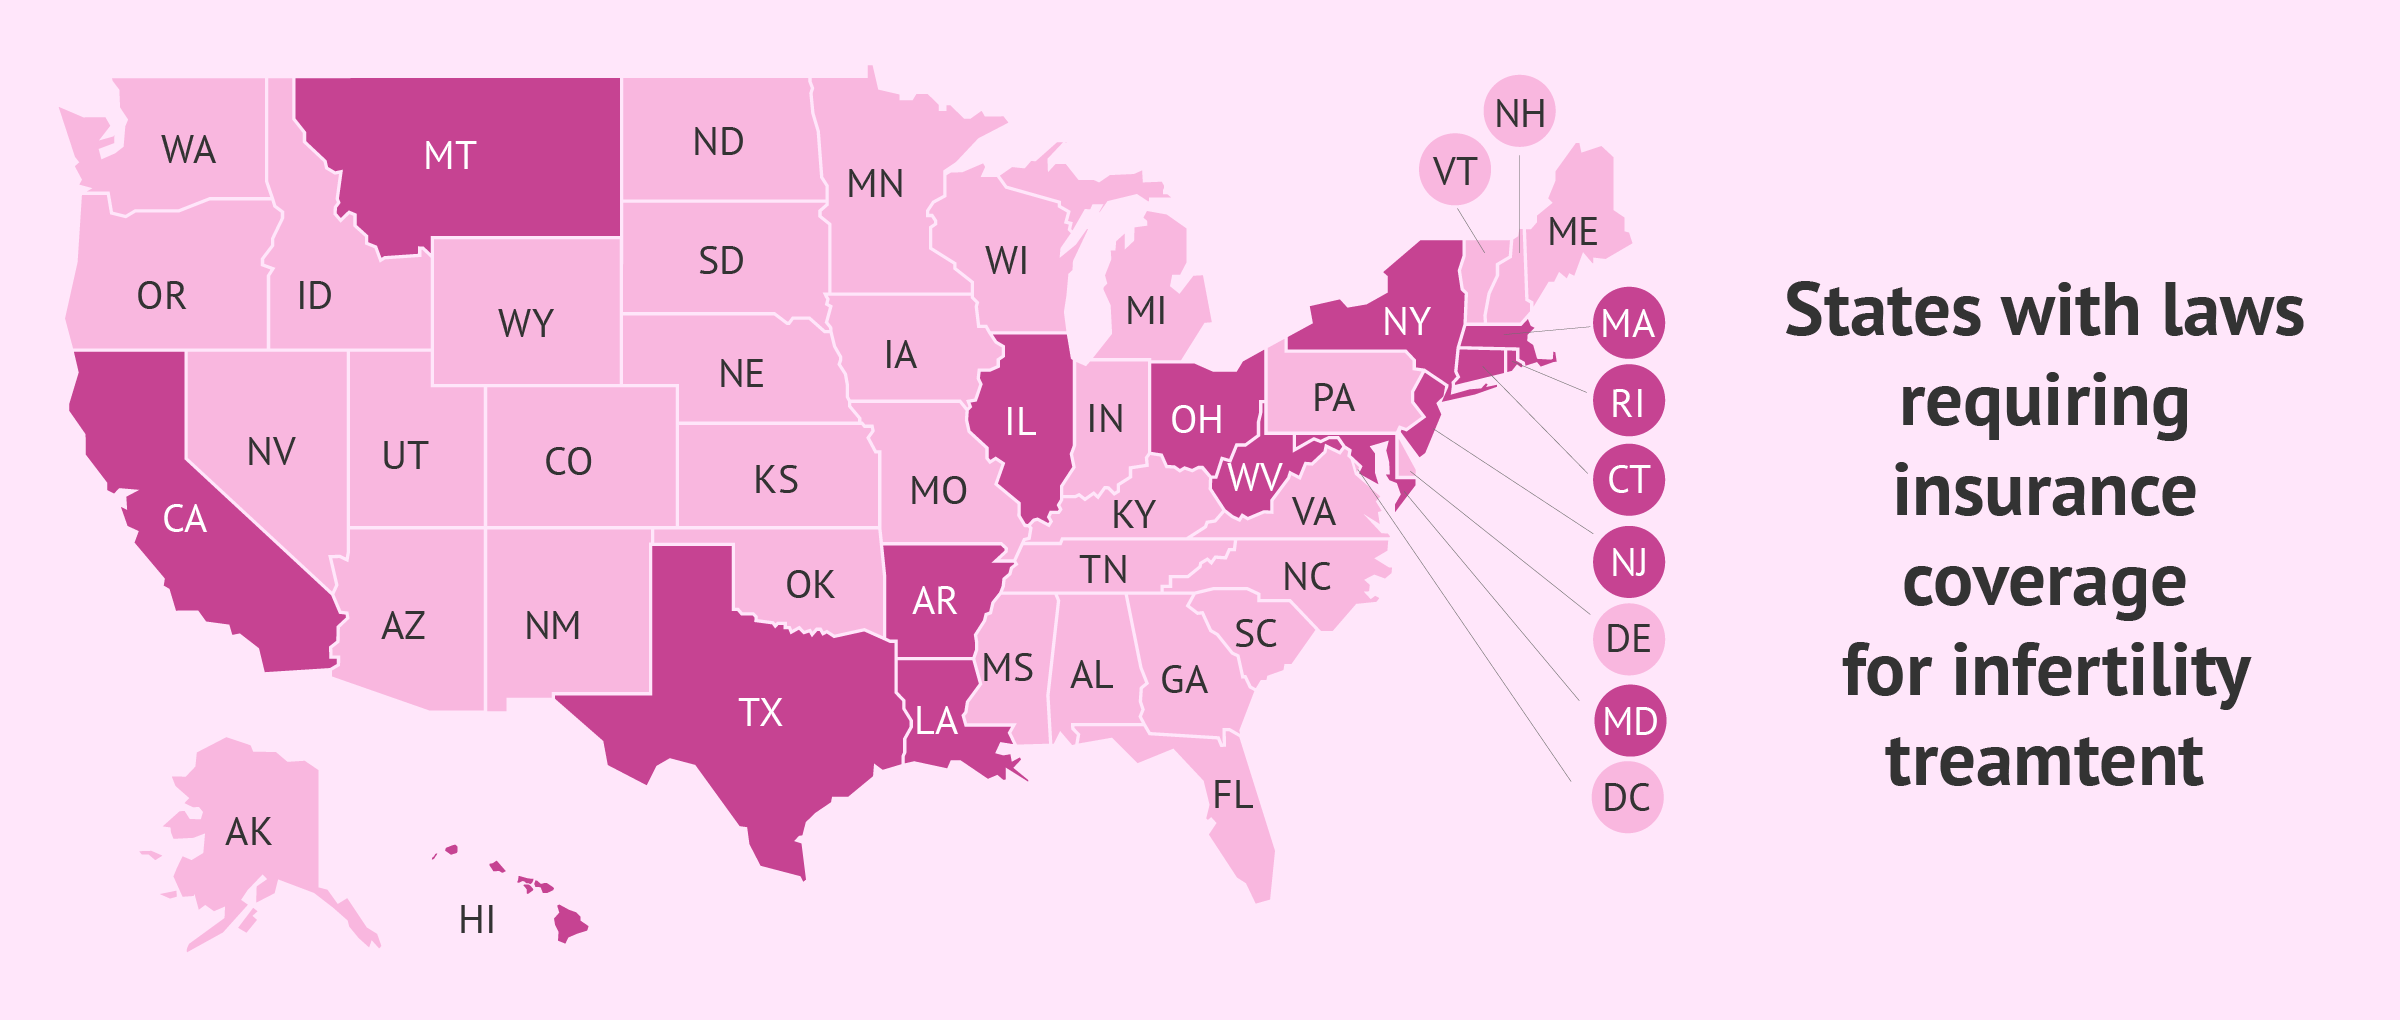 States that cover infertility treatment by law